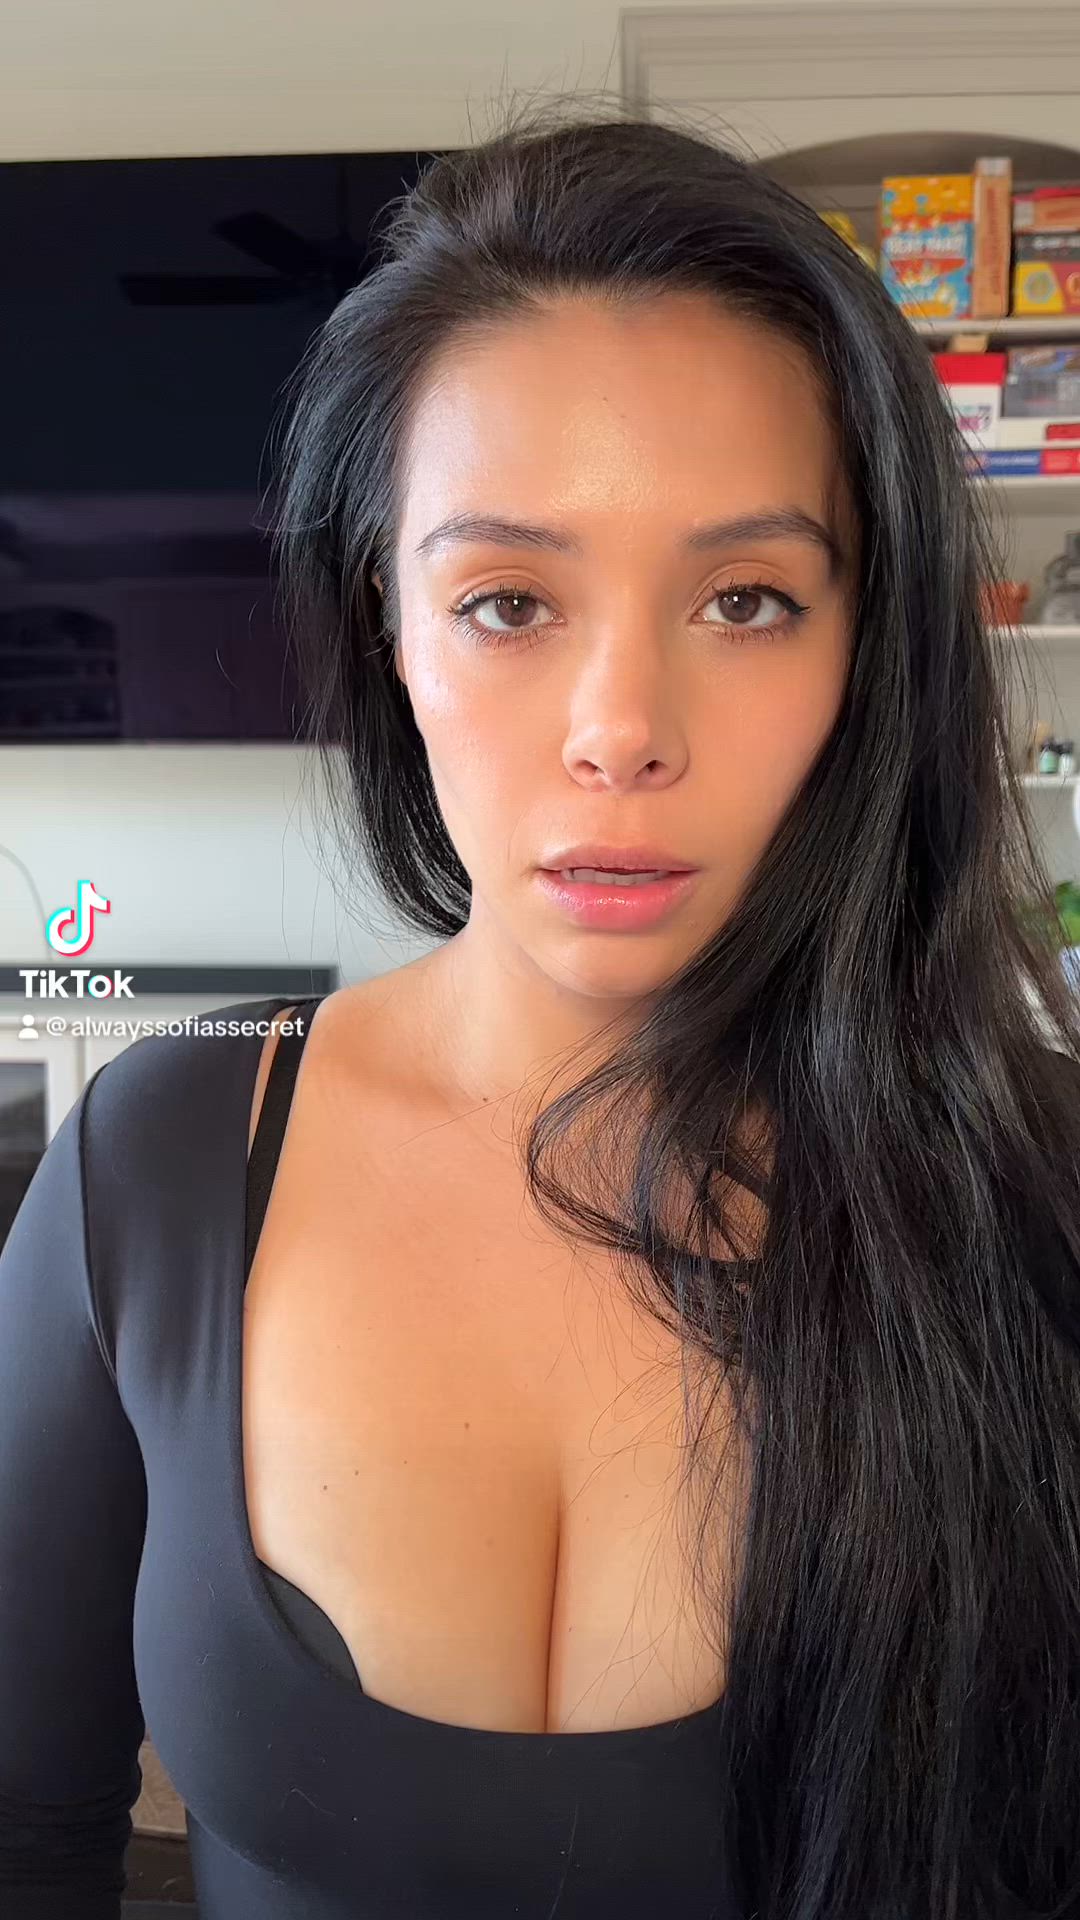 Big Tits porn video with onlyfans model alwayssofia <strong>@alwayssofia</strong>